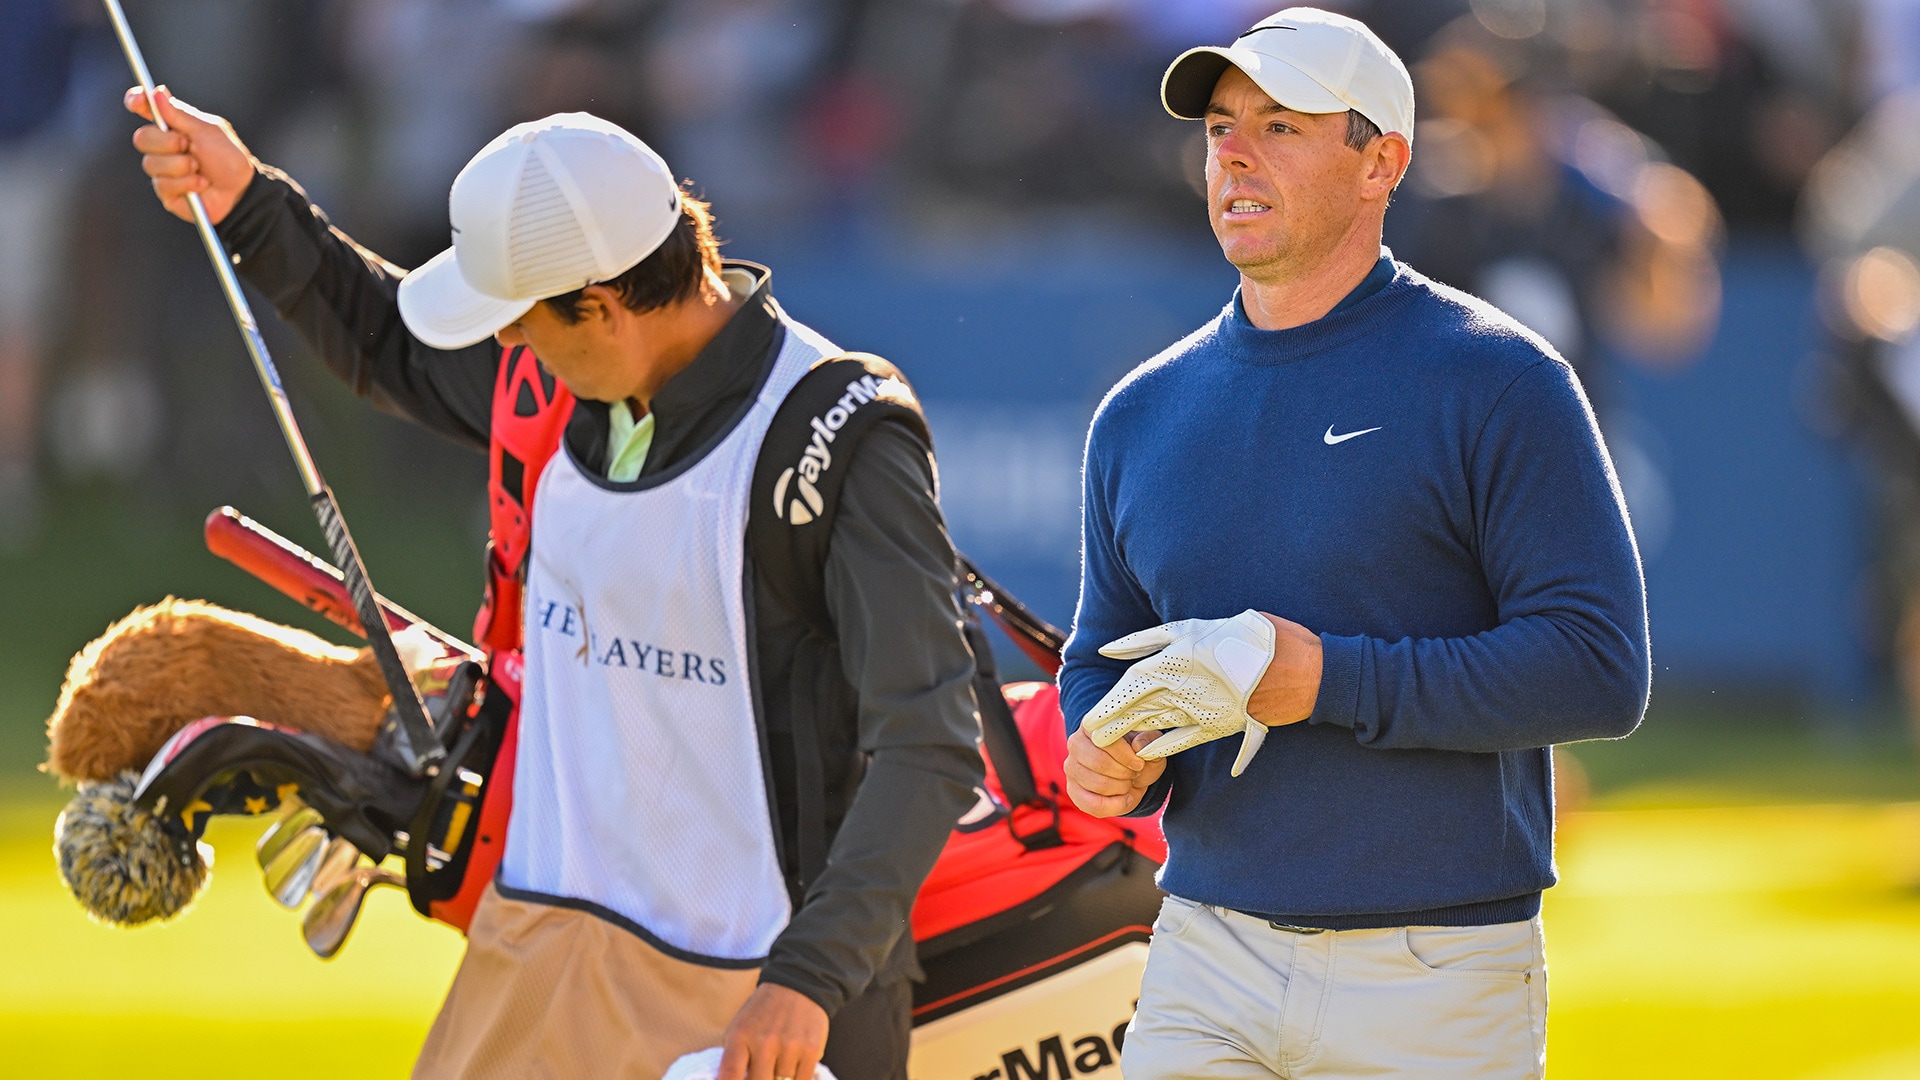 As Masters awaits, Rory McIlroy has driving and putting issues to shore up